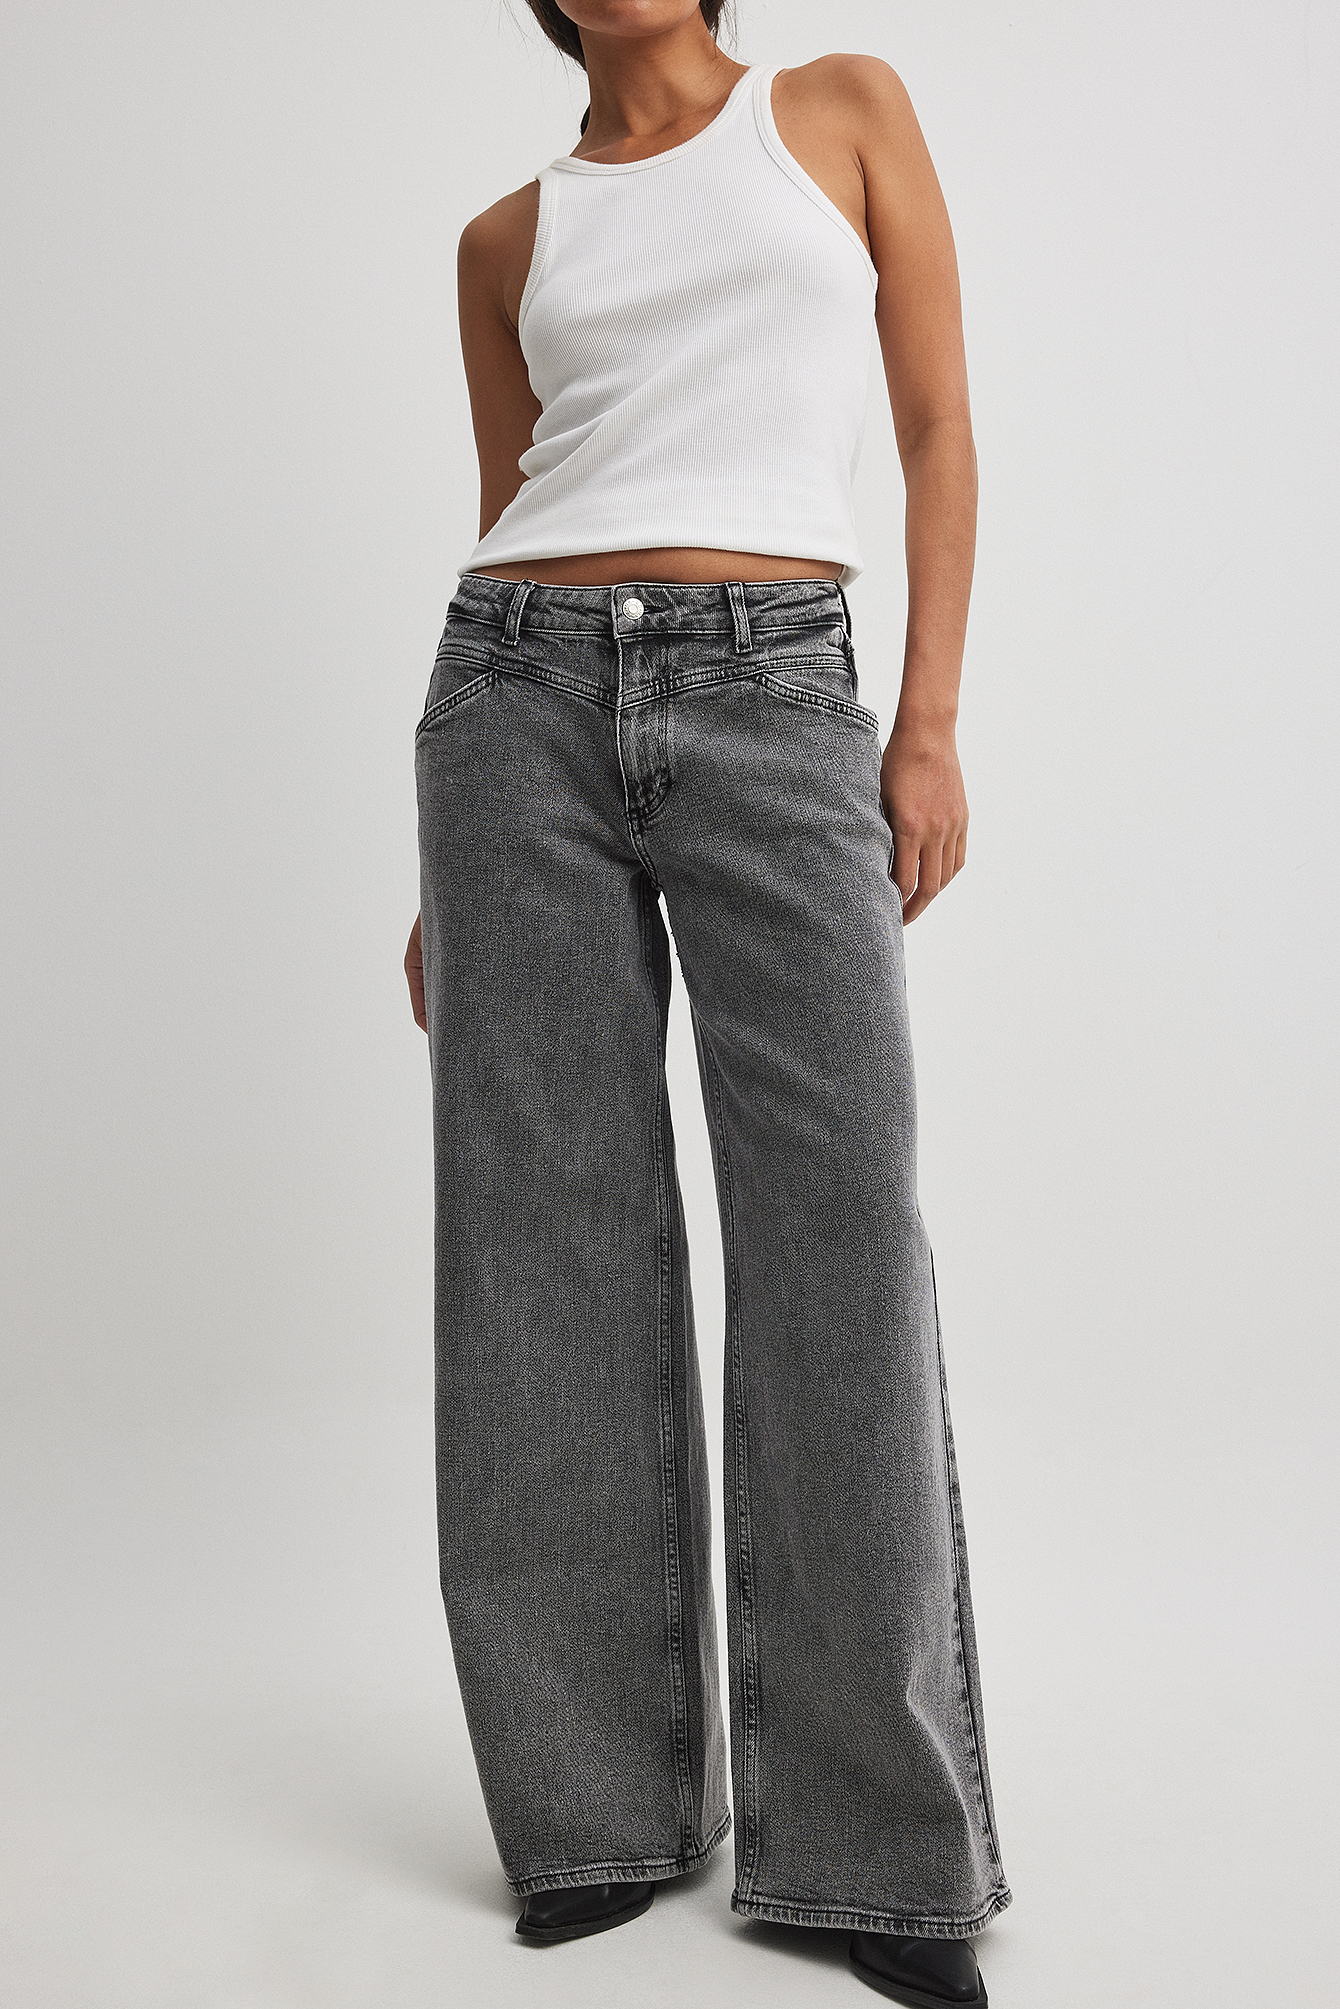 High Waisted Washed Bootcut Jeans | Korean fashion, Bootcut jeans, Bootcut